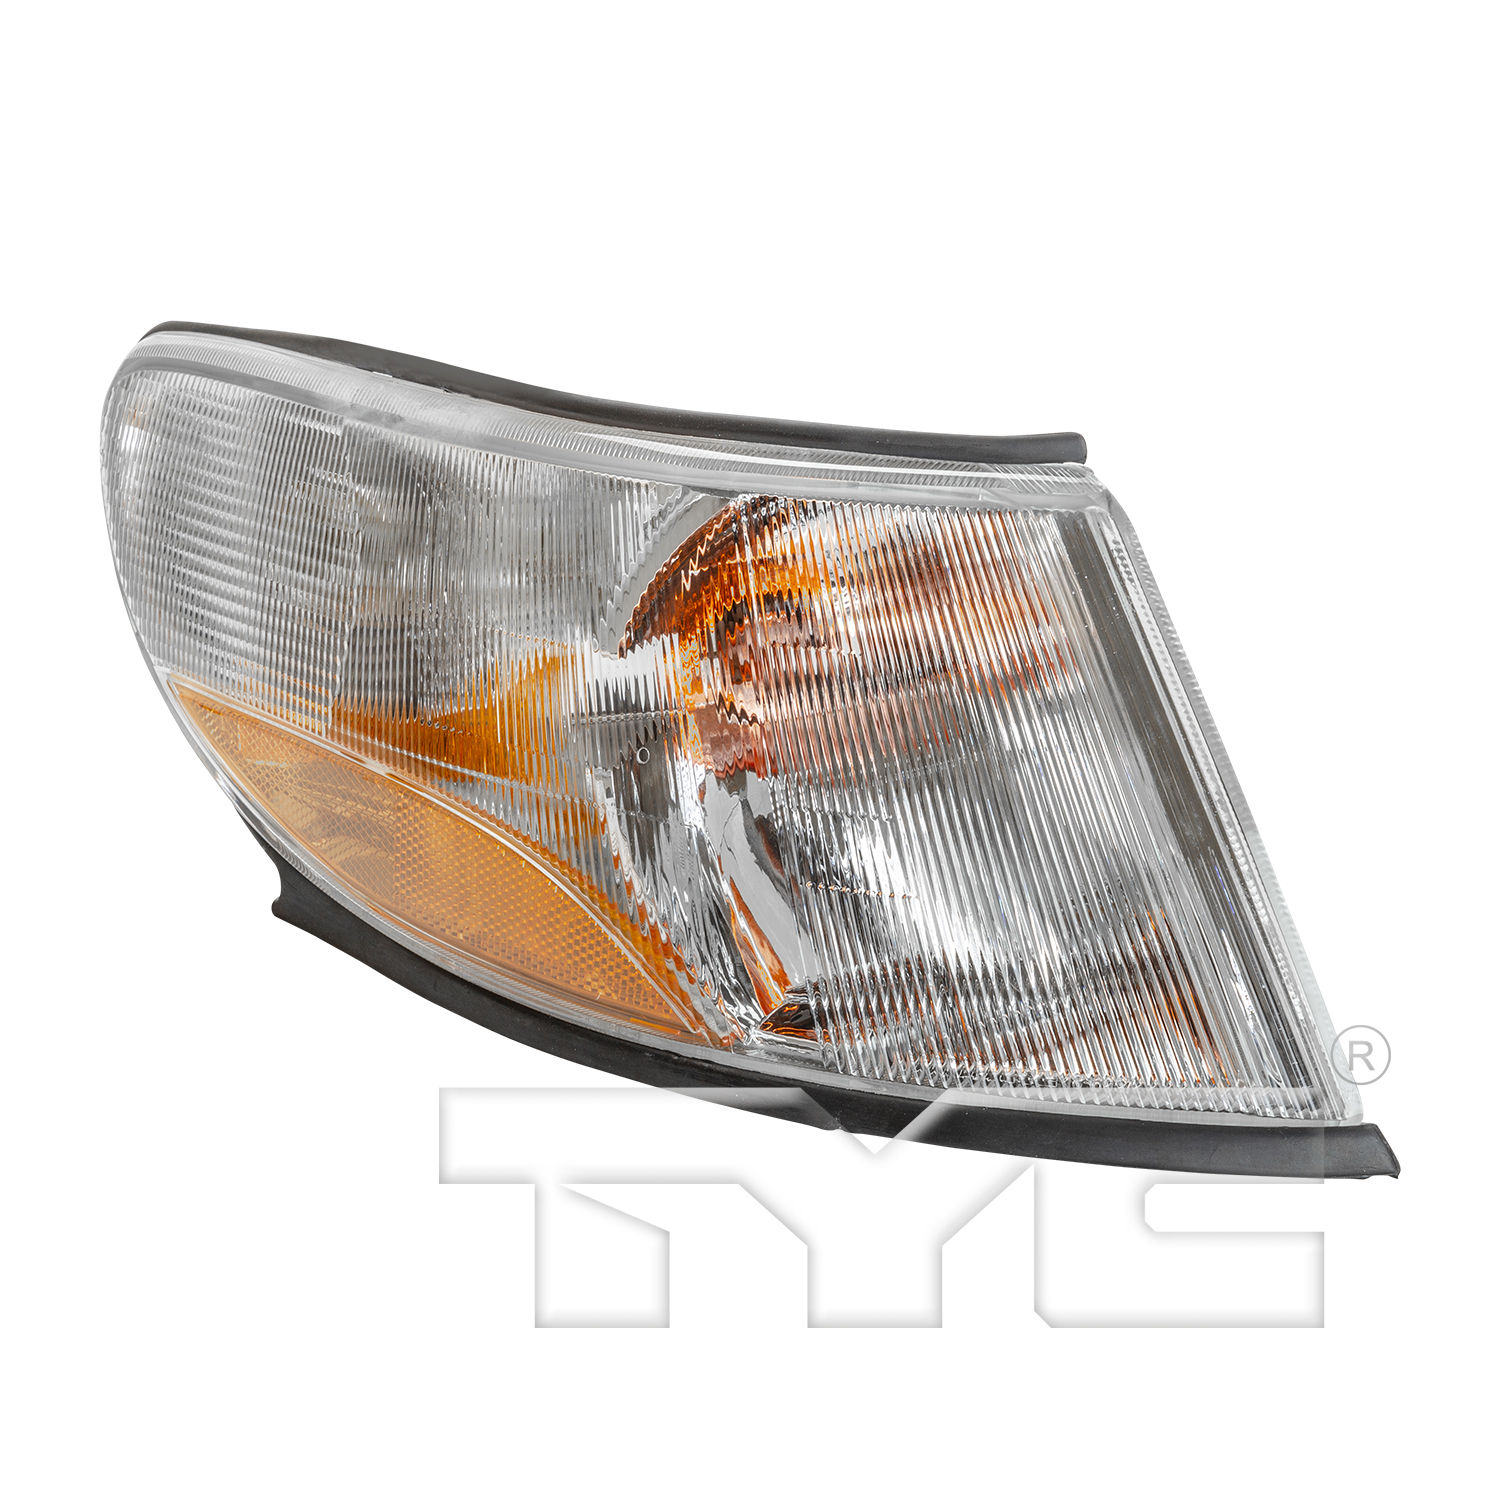 Aftermarket LAMPS for SAAB - 9-3, 9-3,99-02,RT Front signal lamp